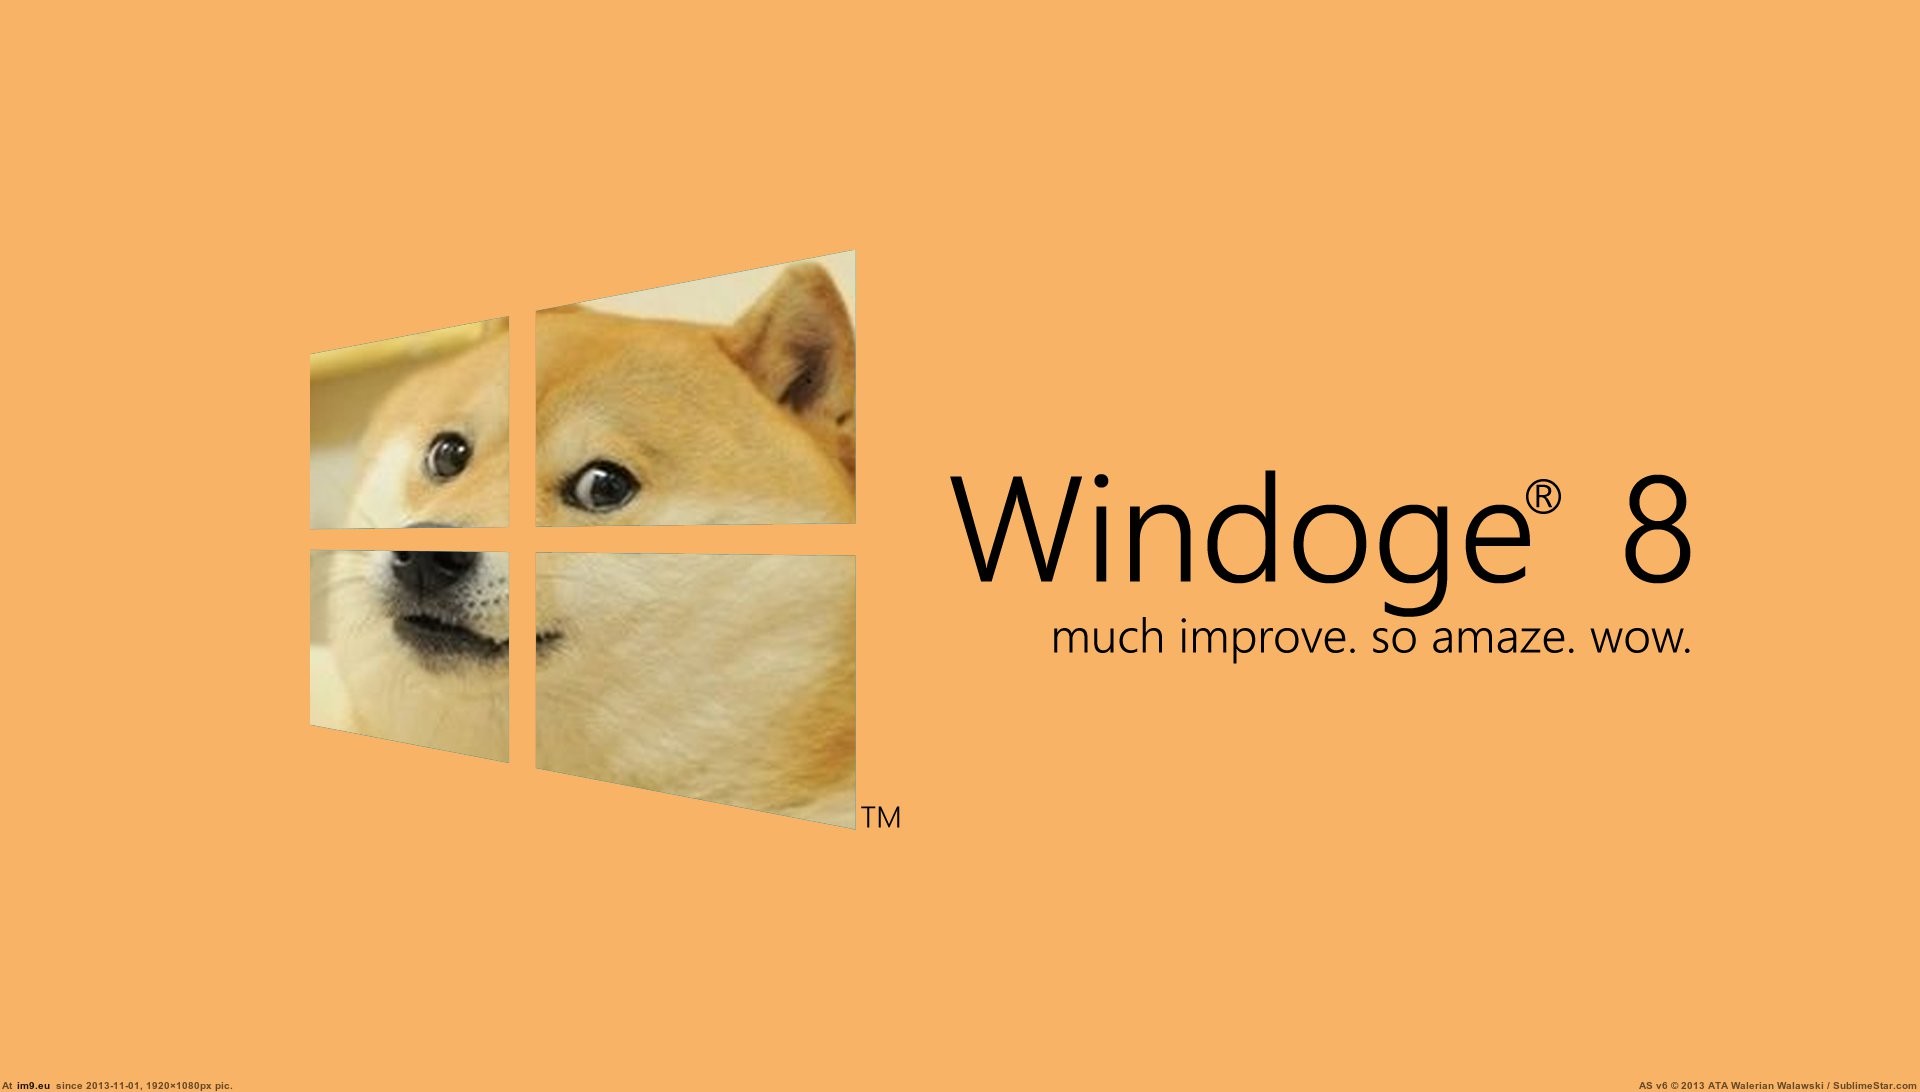 1920x1092 Doge Wallpapers For Android For Desktop Wallpaper 1920 x 1092 px 630 KB mac  1980x1080 iphone